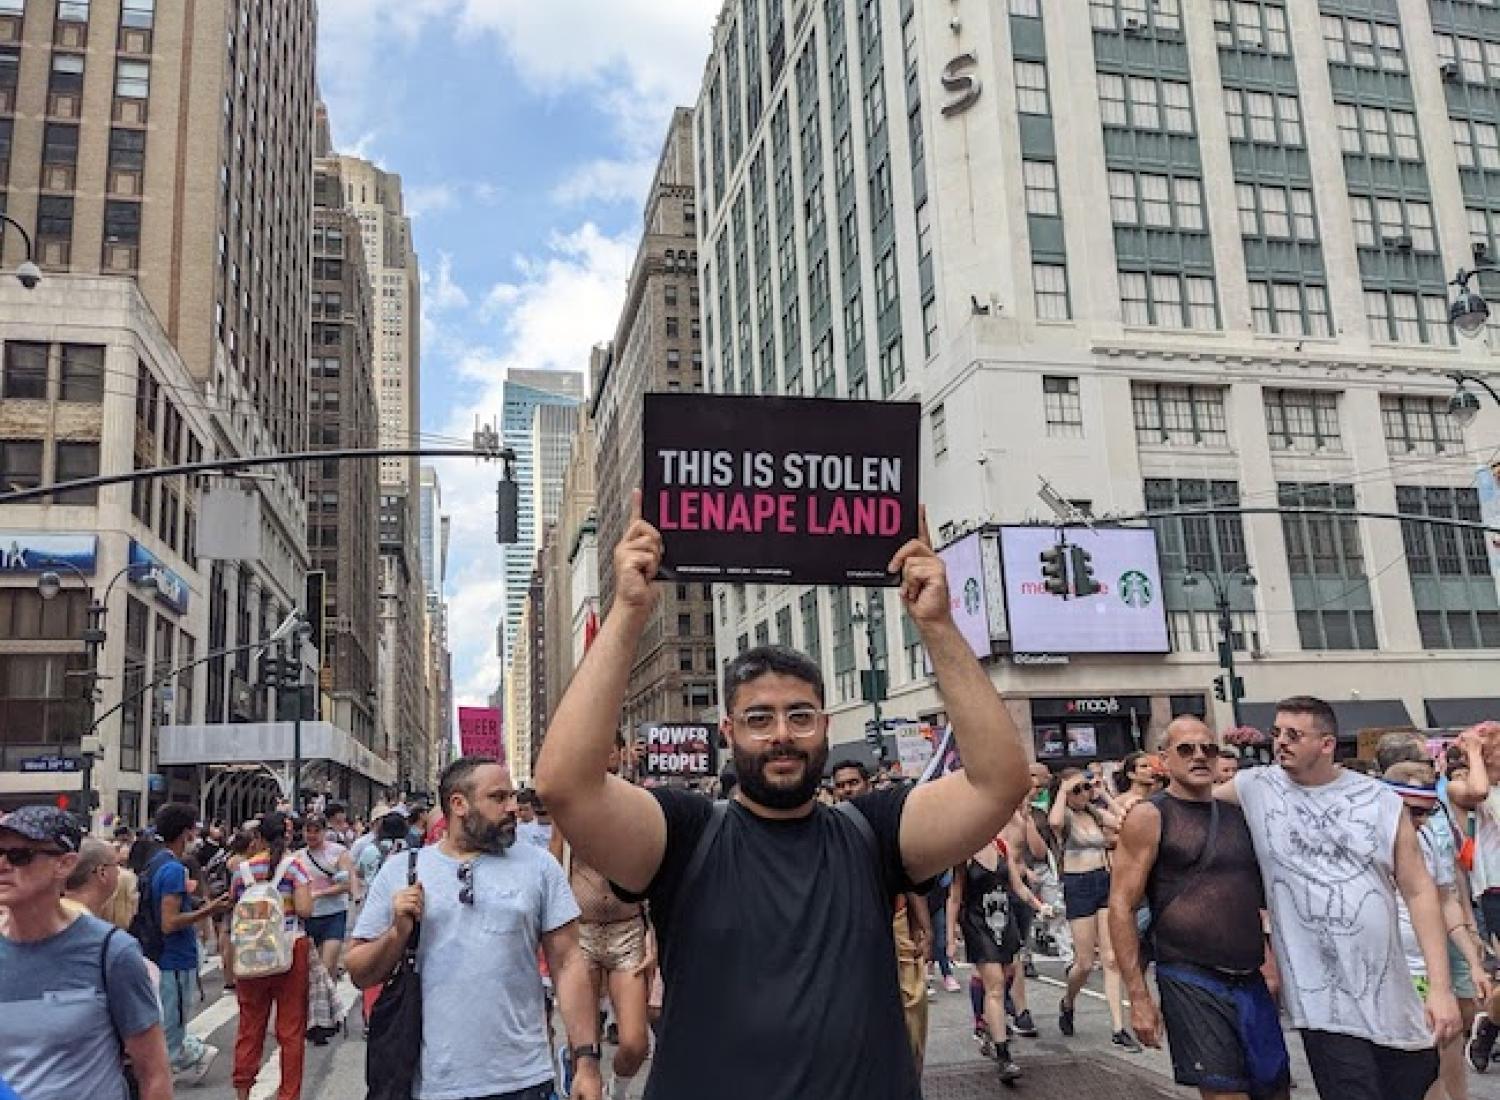 A man in a march down a city street carries a small black sign that reads "This is stolen Lenape Land" in pink and white text.